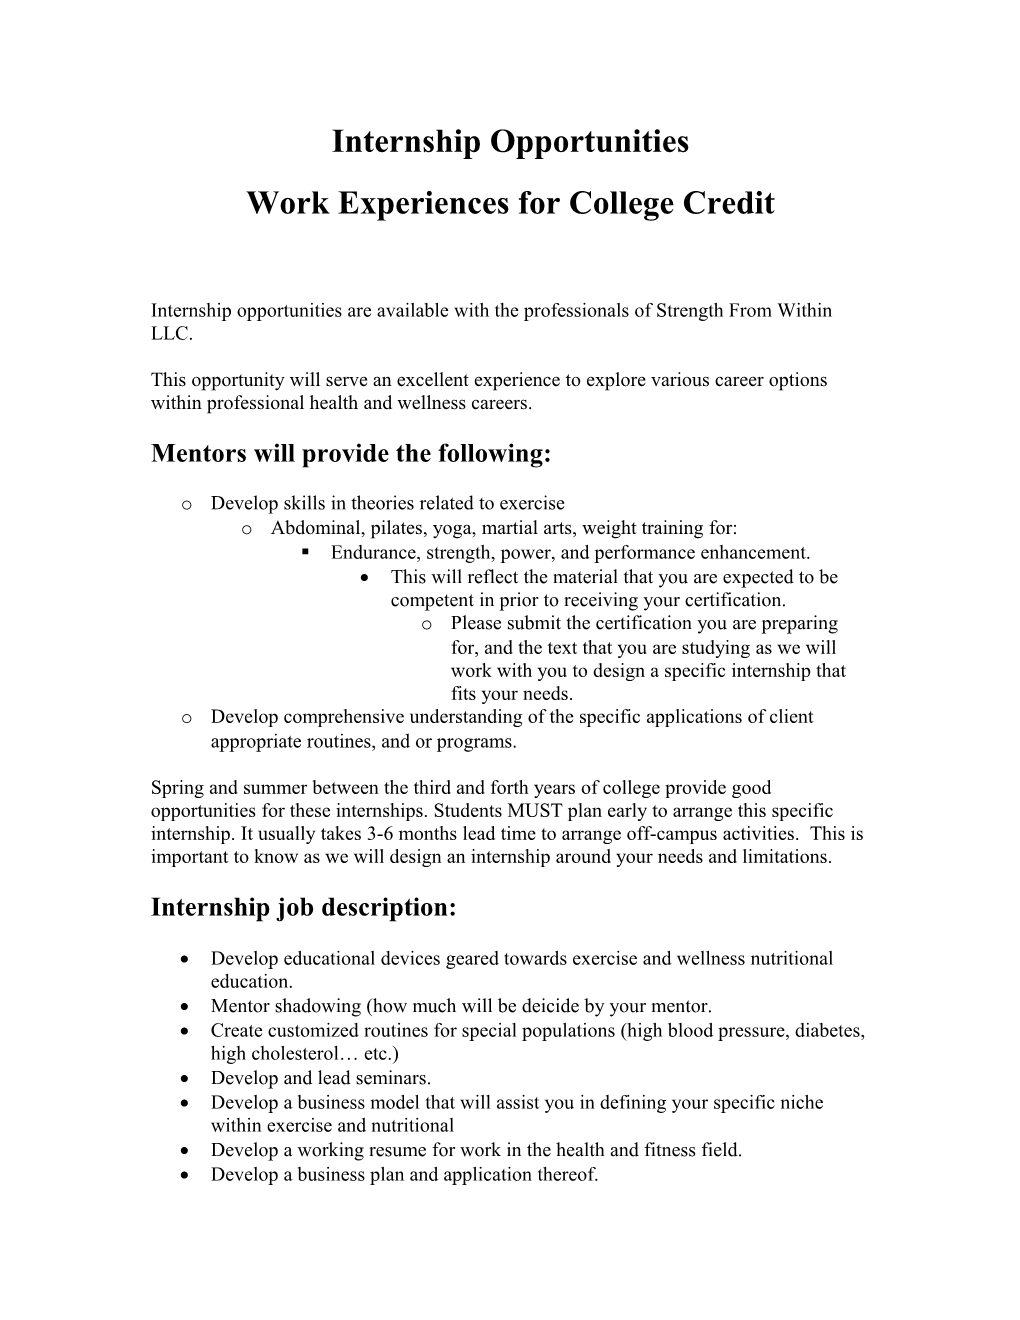 Internship Opportunities/ Work Experiences for College Credit